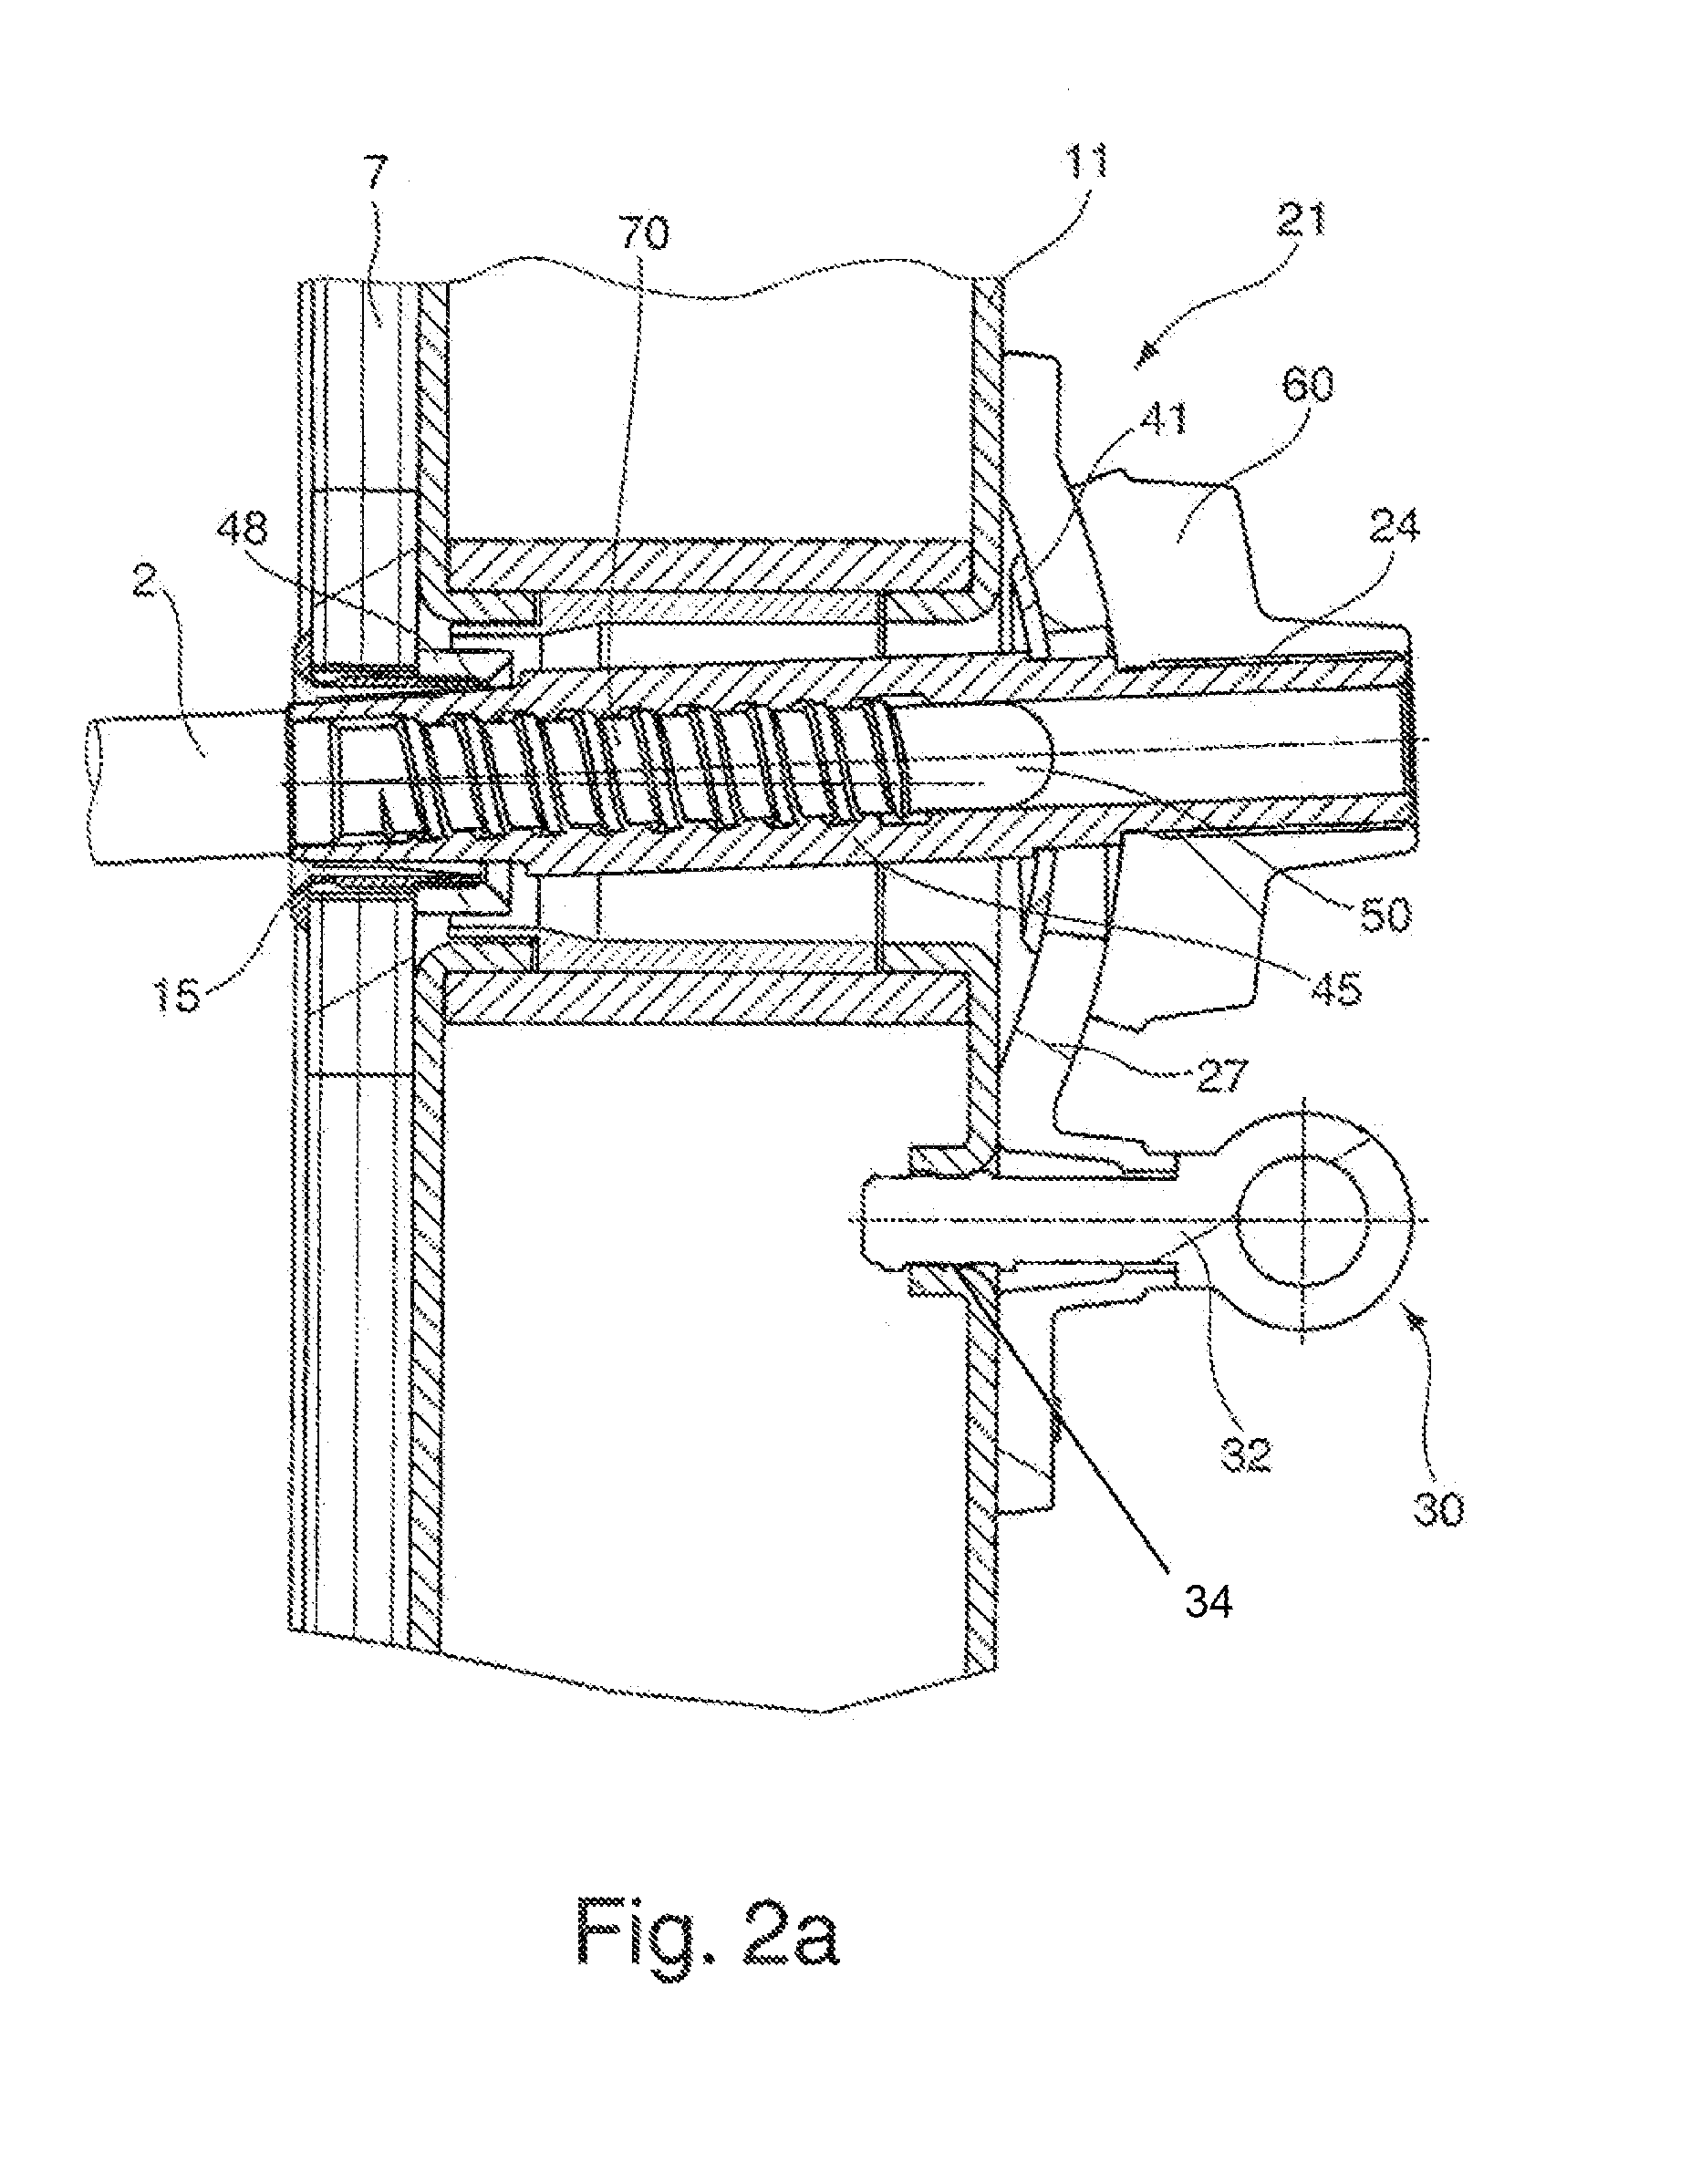 Anchor system of a concrete wall formwork